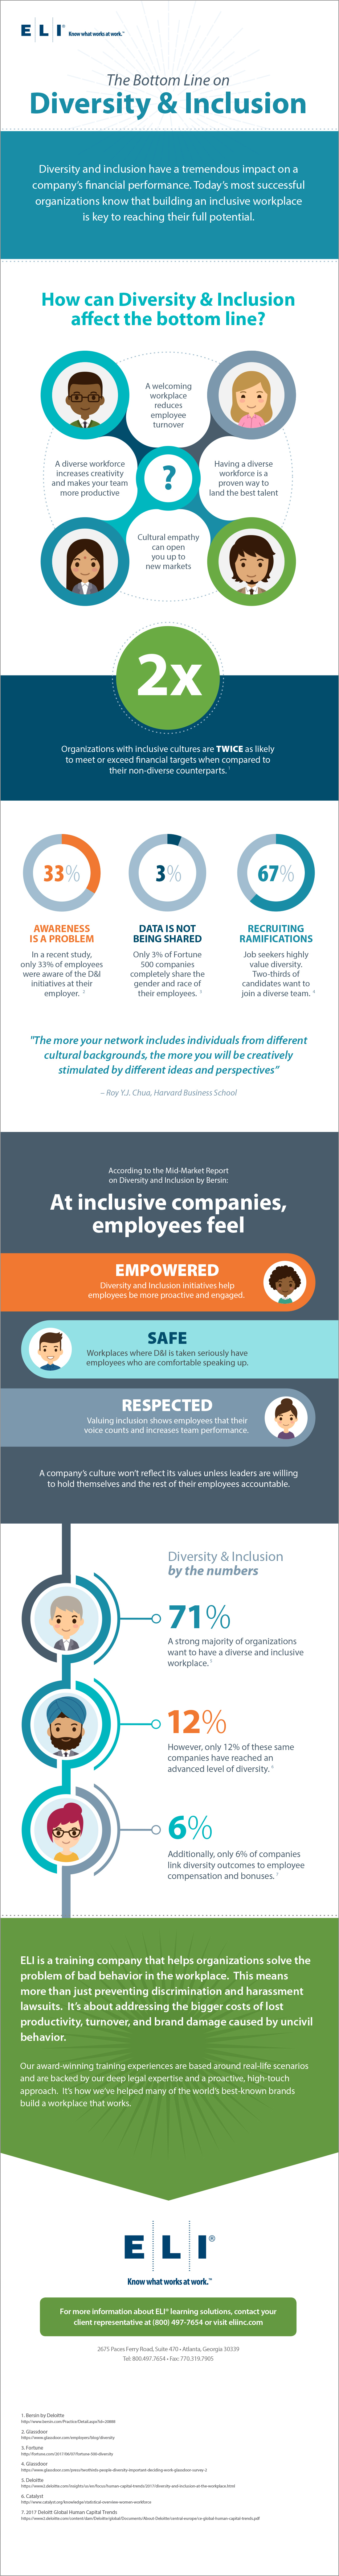 The Bottom Line on Diversity and Inclusion - ELI, Inc.